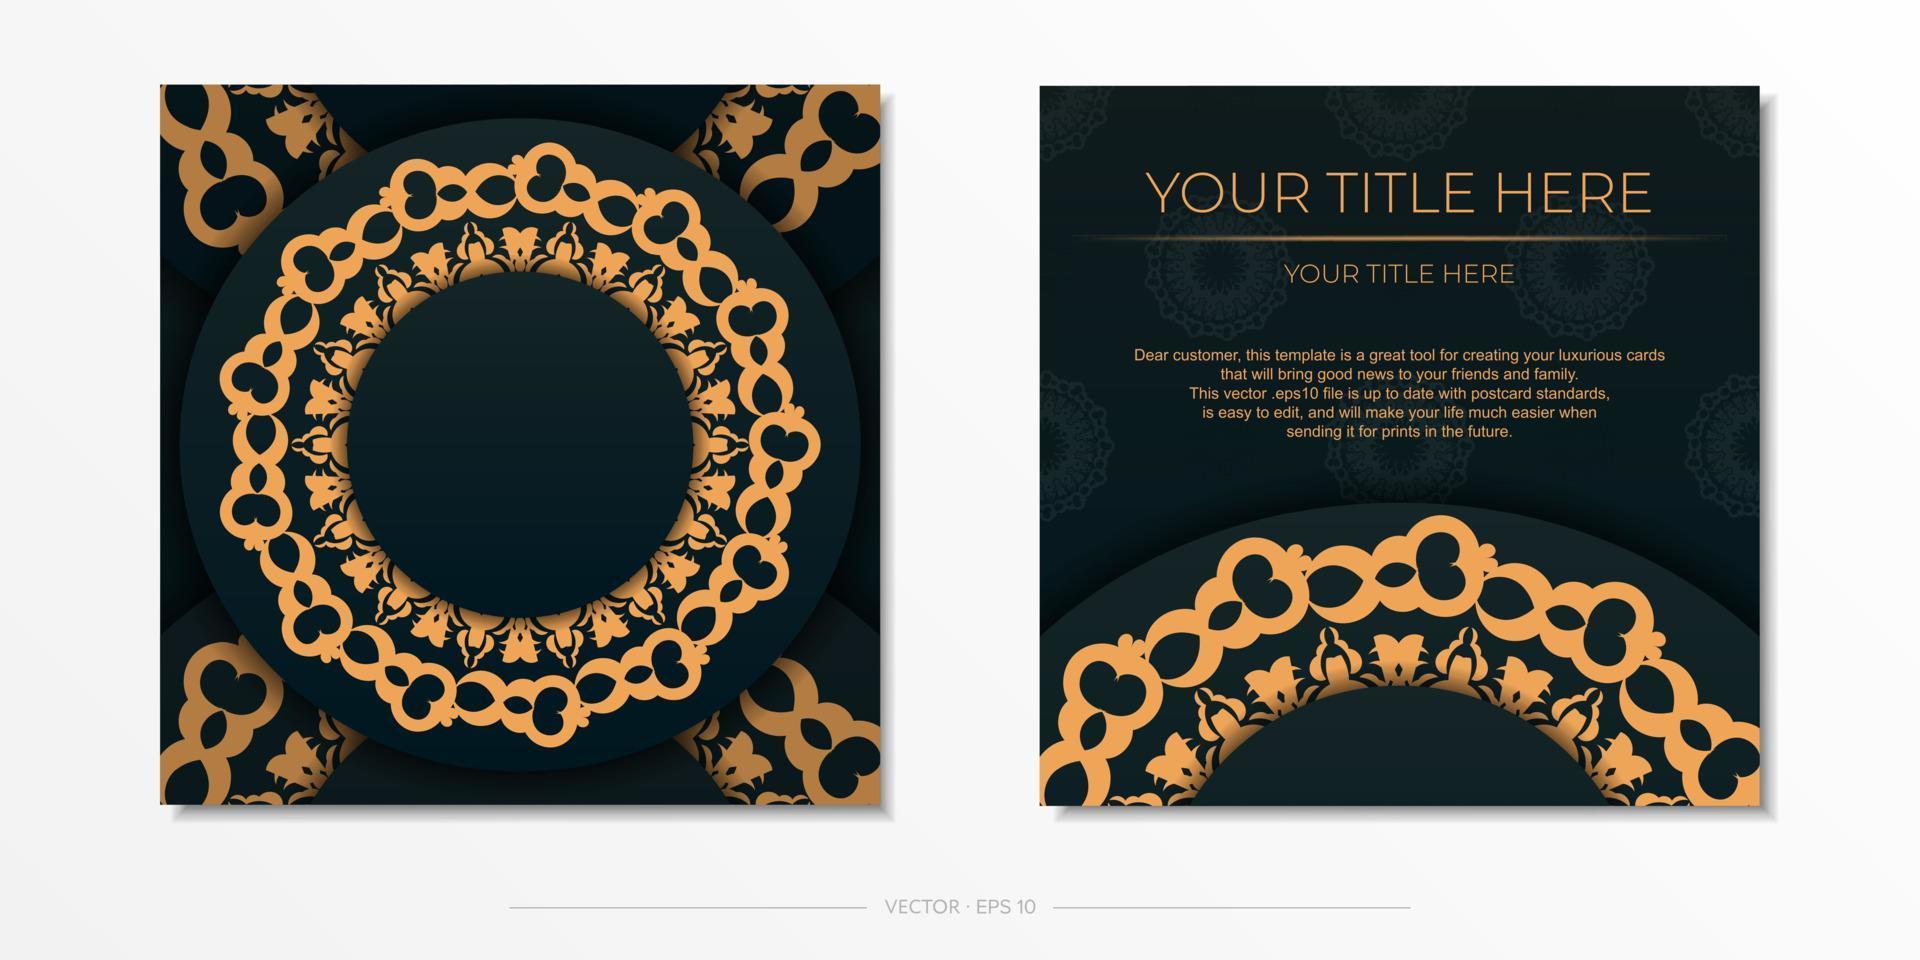 Dark green invitation card template with white abstract ornament. Elegant and classic vector elements are great for decoration.